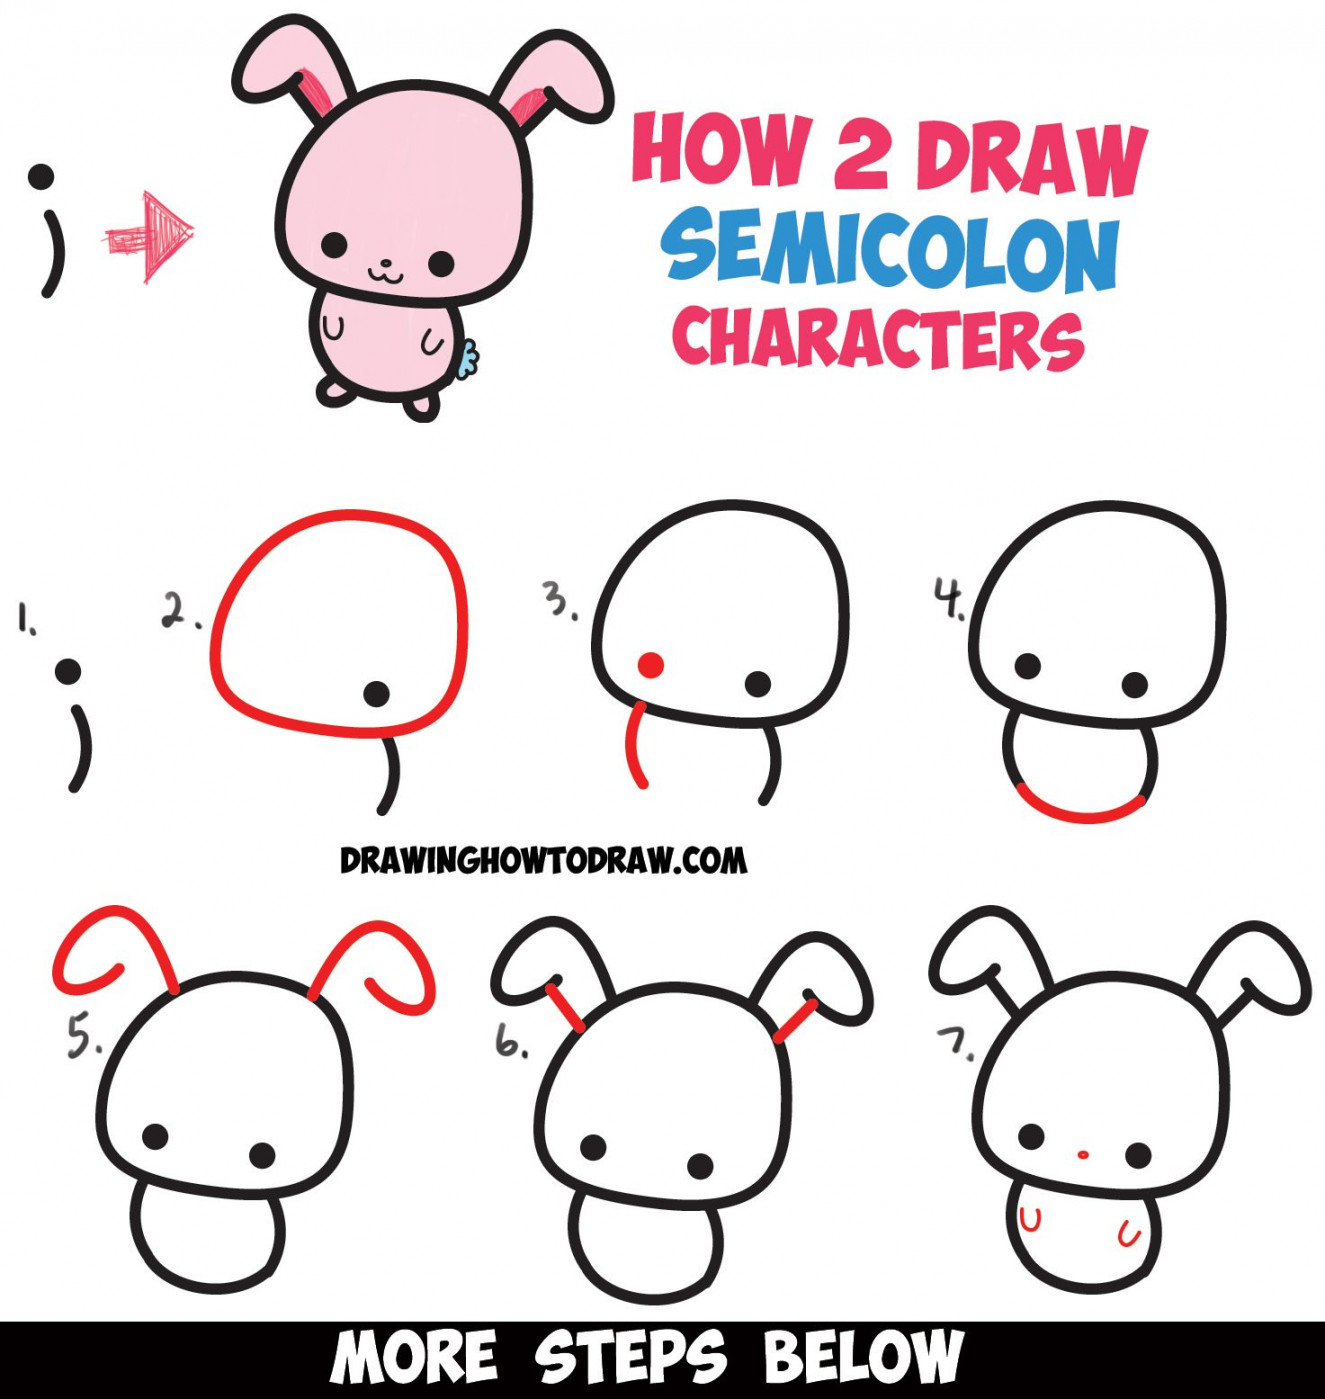 How to Draw Cute Cartoon Characters from Semicolons - Easy Step by